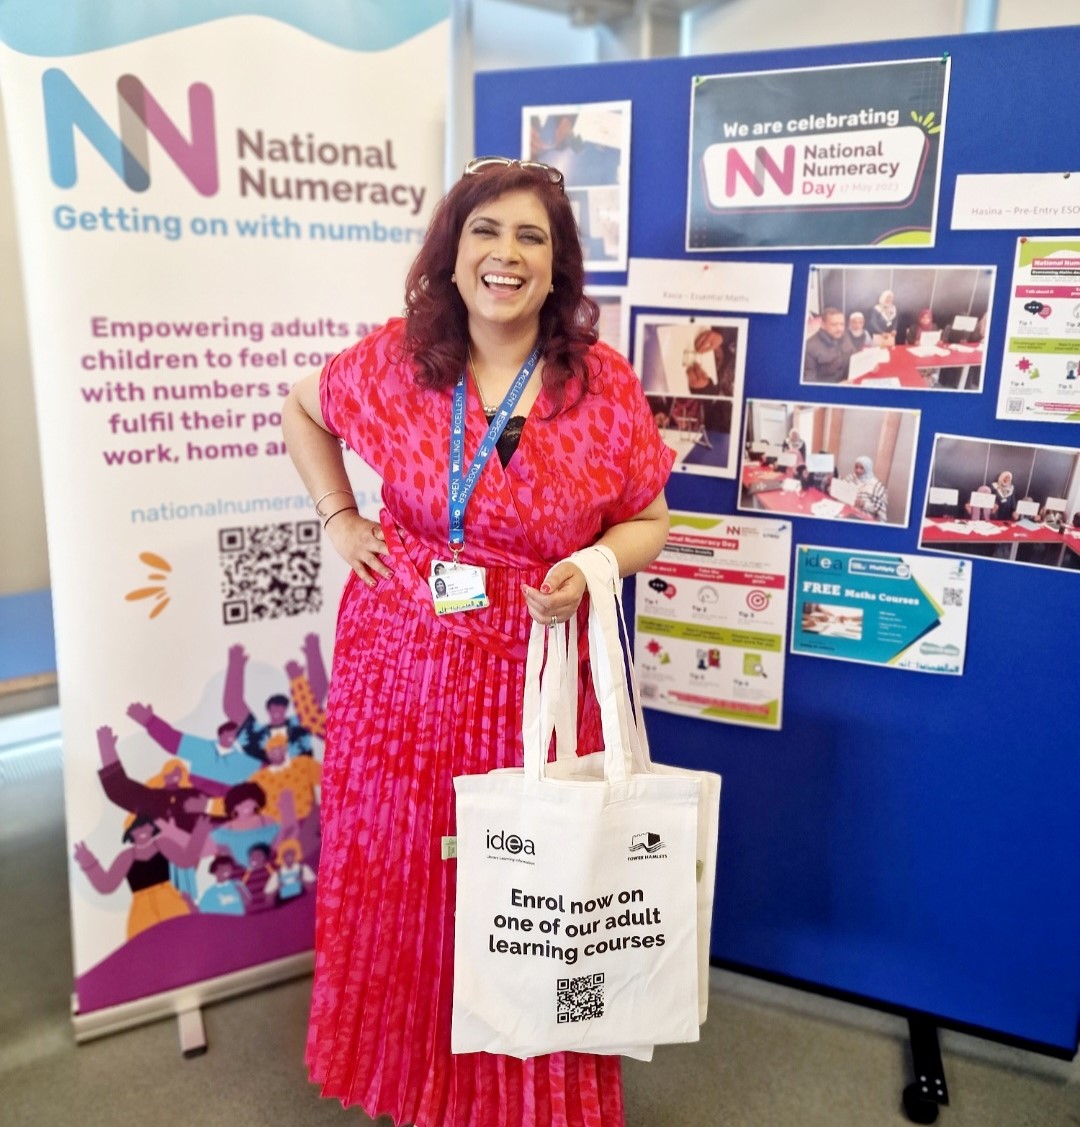 Smiling lady Nikki Chatha in front of a National Numeracy display